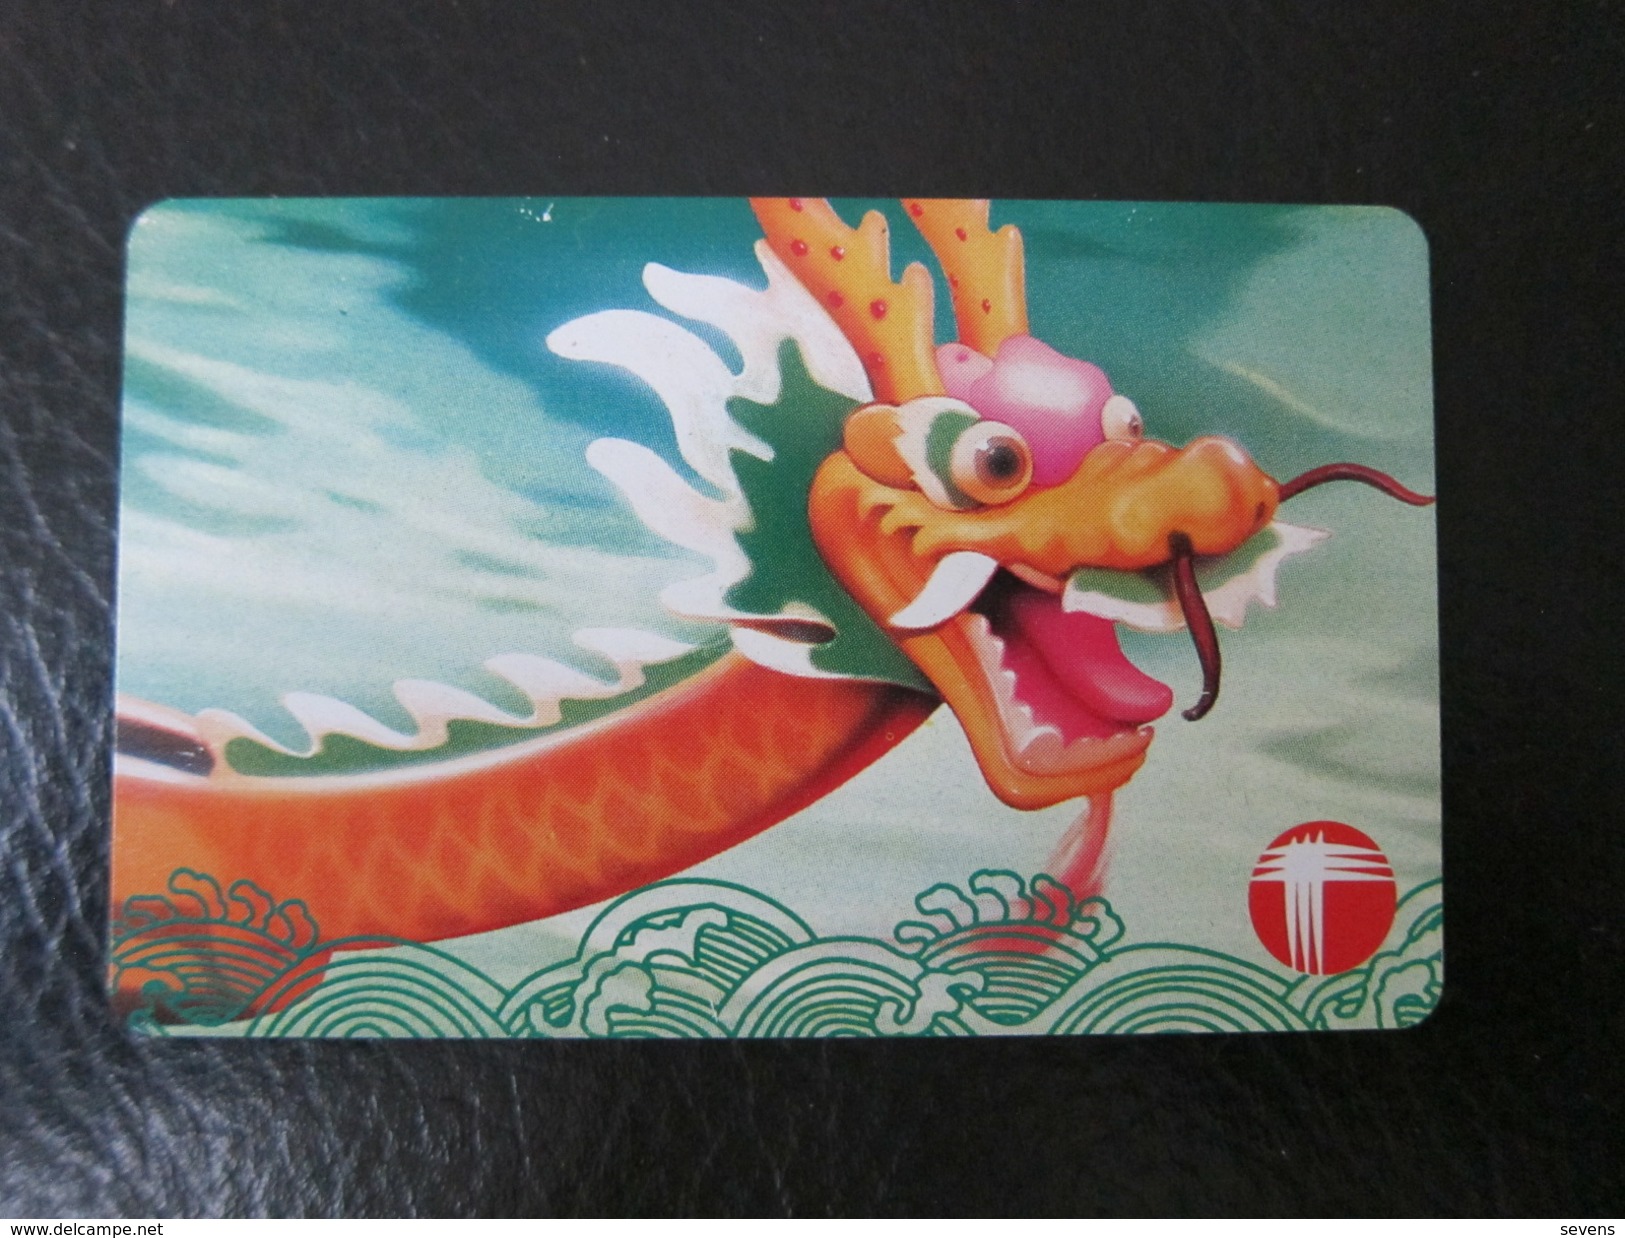 Limited Issued Autelca Phonecard,Dragon Boat Festive, Set Of 1,mint(with Tiny Scratch) - Hongkong